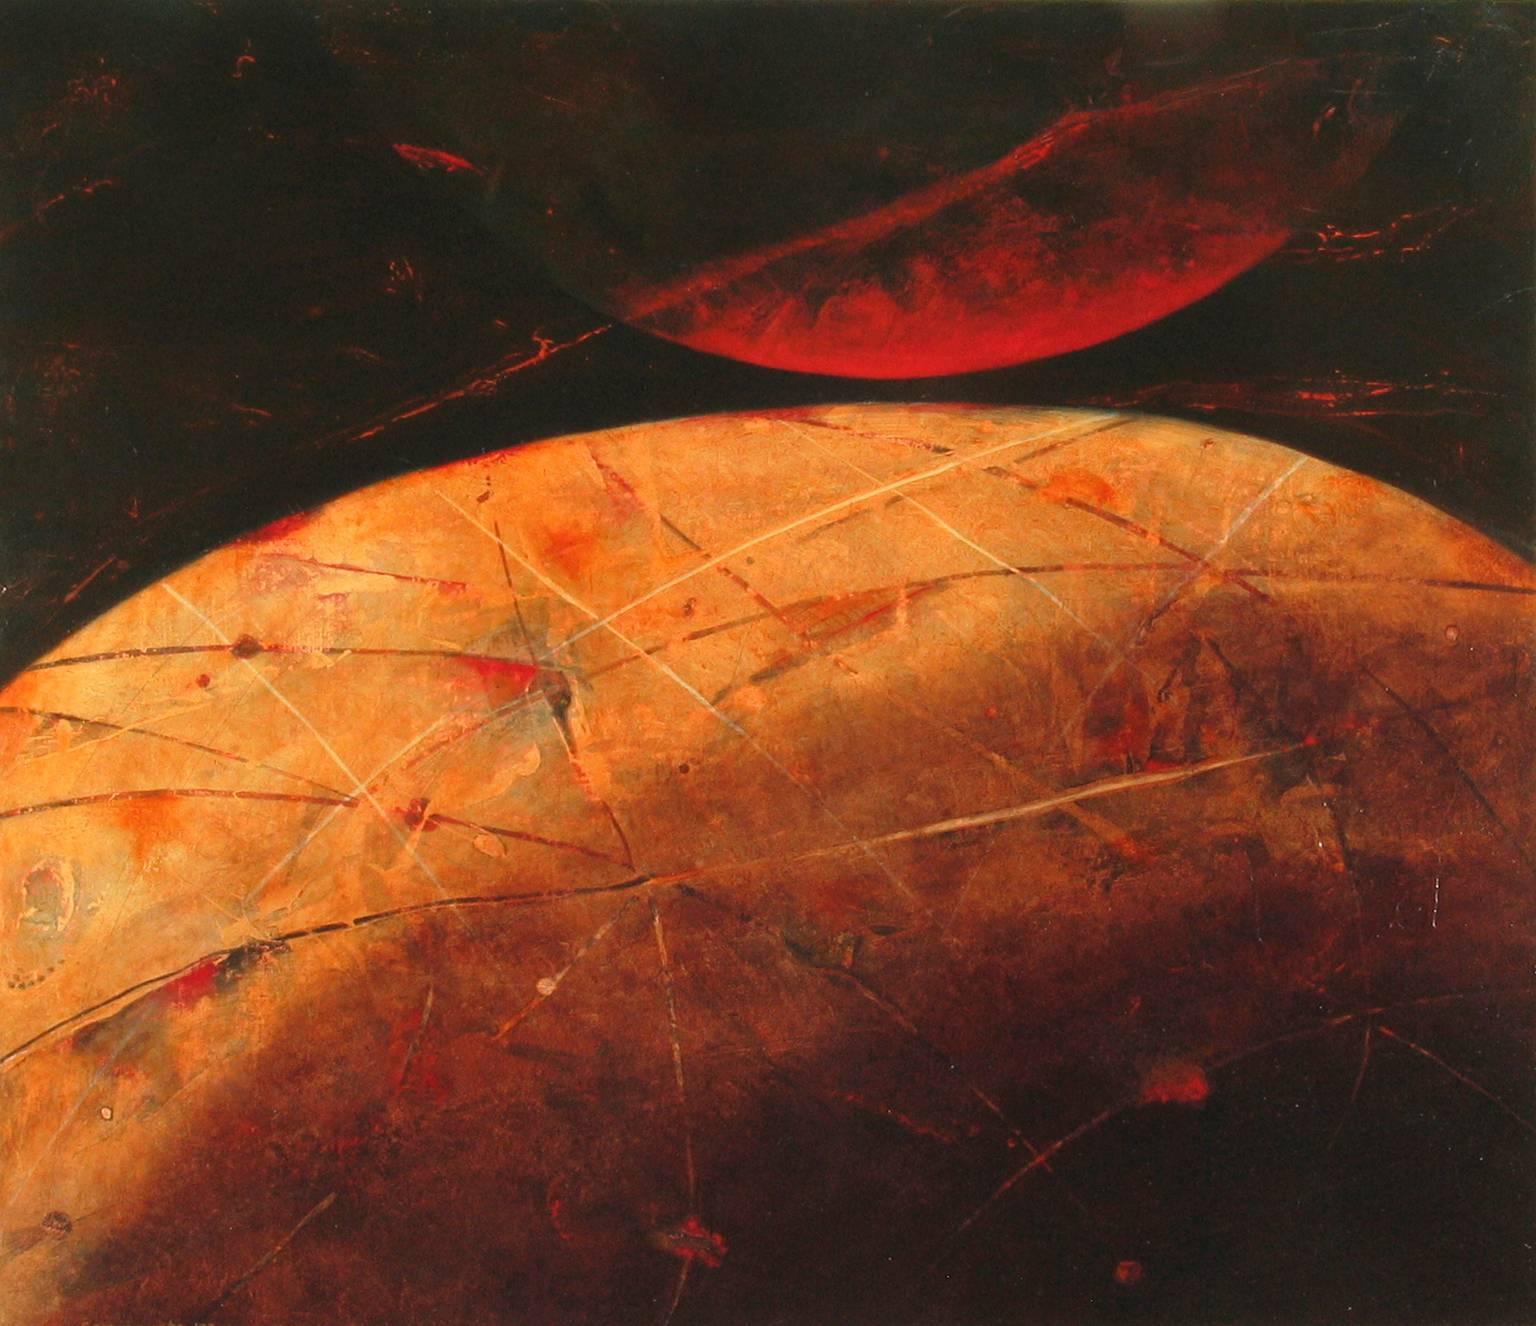 Kathleen Cammarata Abstract Painting - "Surface Dwellers" - Horizontal planet painting in red and sienna colors.